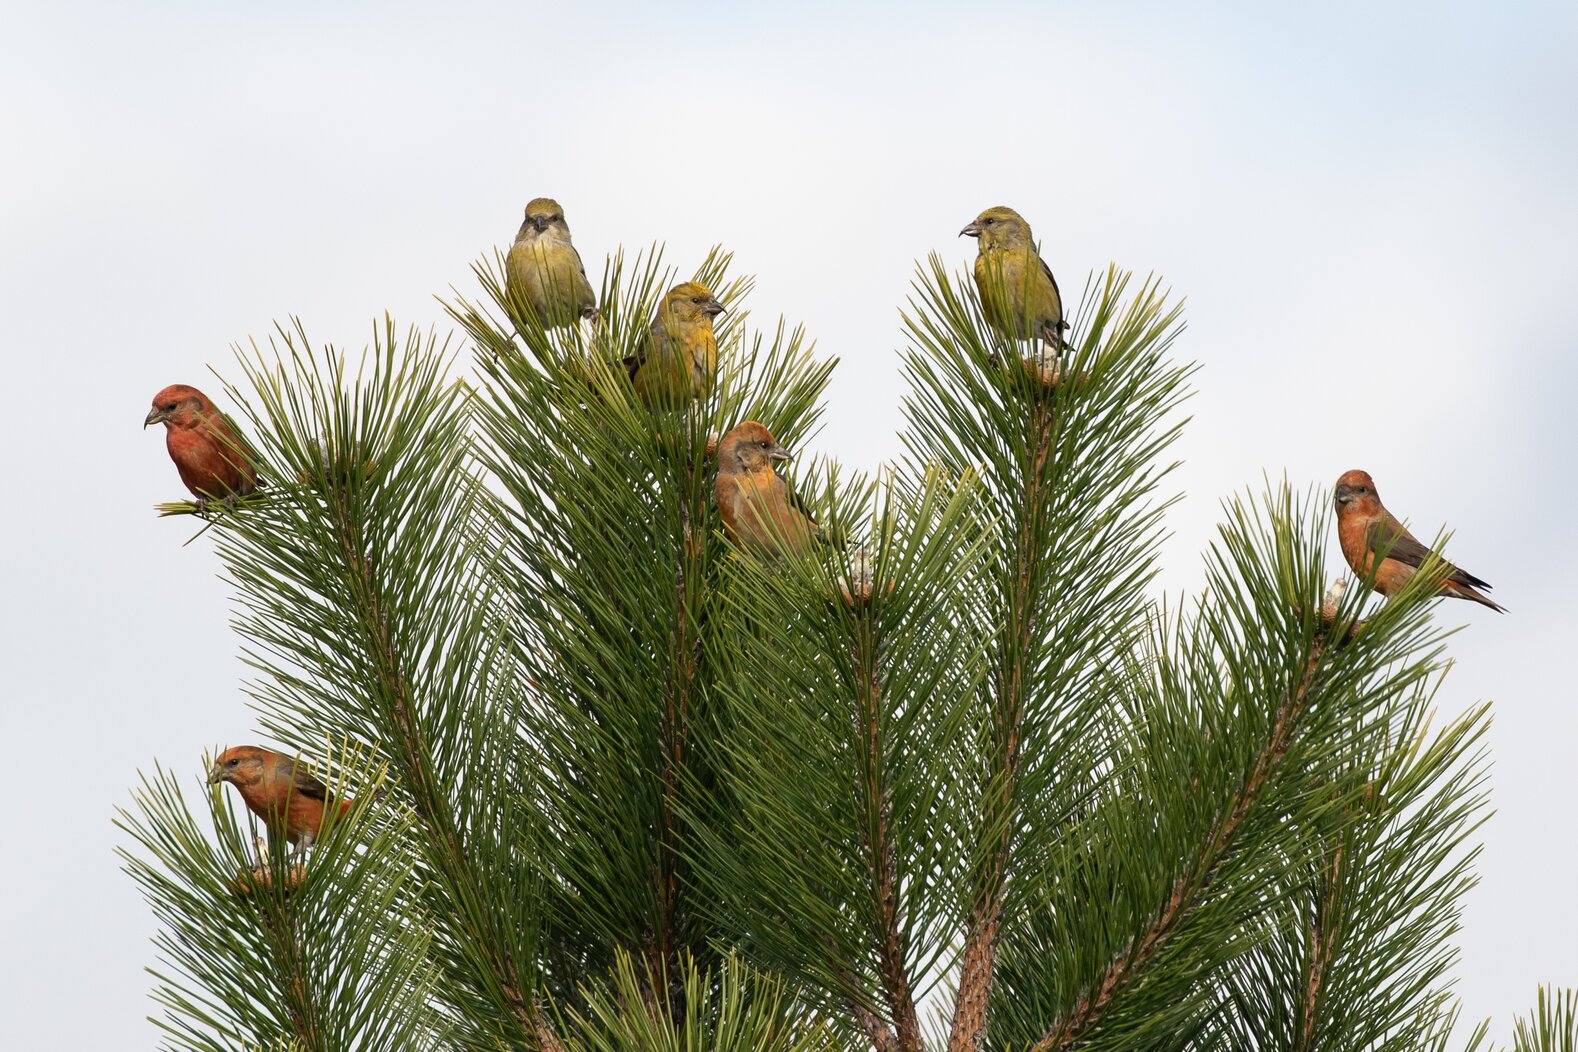 The pines at Floyd Bennett Field may hold all sorts of surprises in the wintertime—such as this flock of Red Crossbills. Photo: Ryan F. Mandelbaum